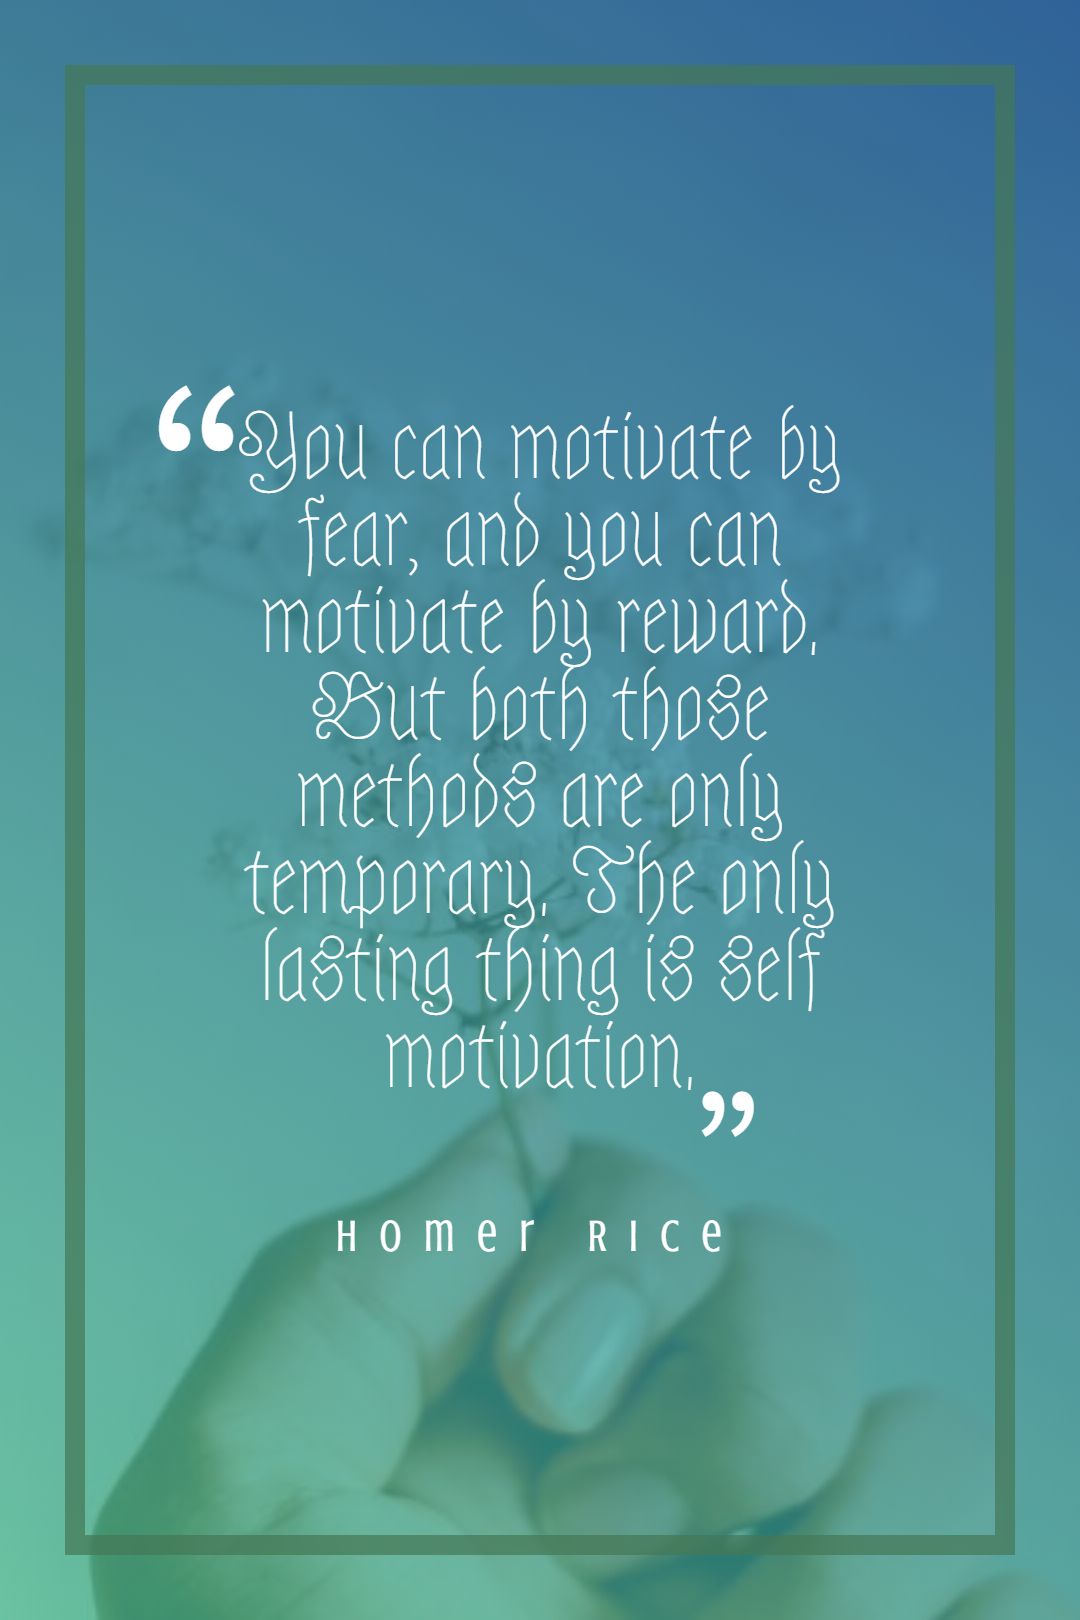 You can motivate by fear and you can motivate by reward. But both those methods are only temporary. The only lasting thing is self motivation.